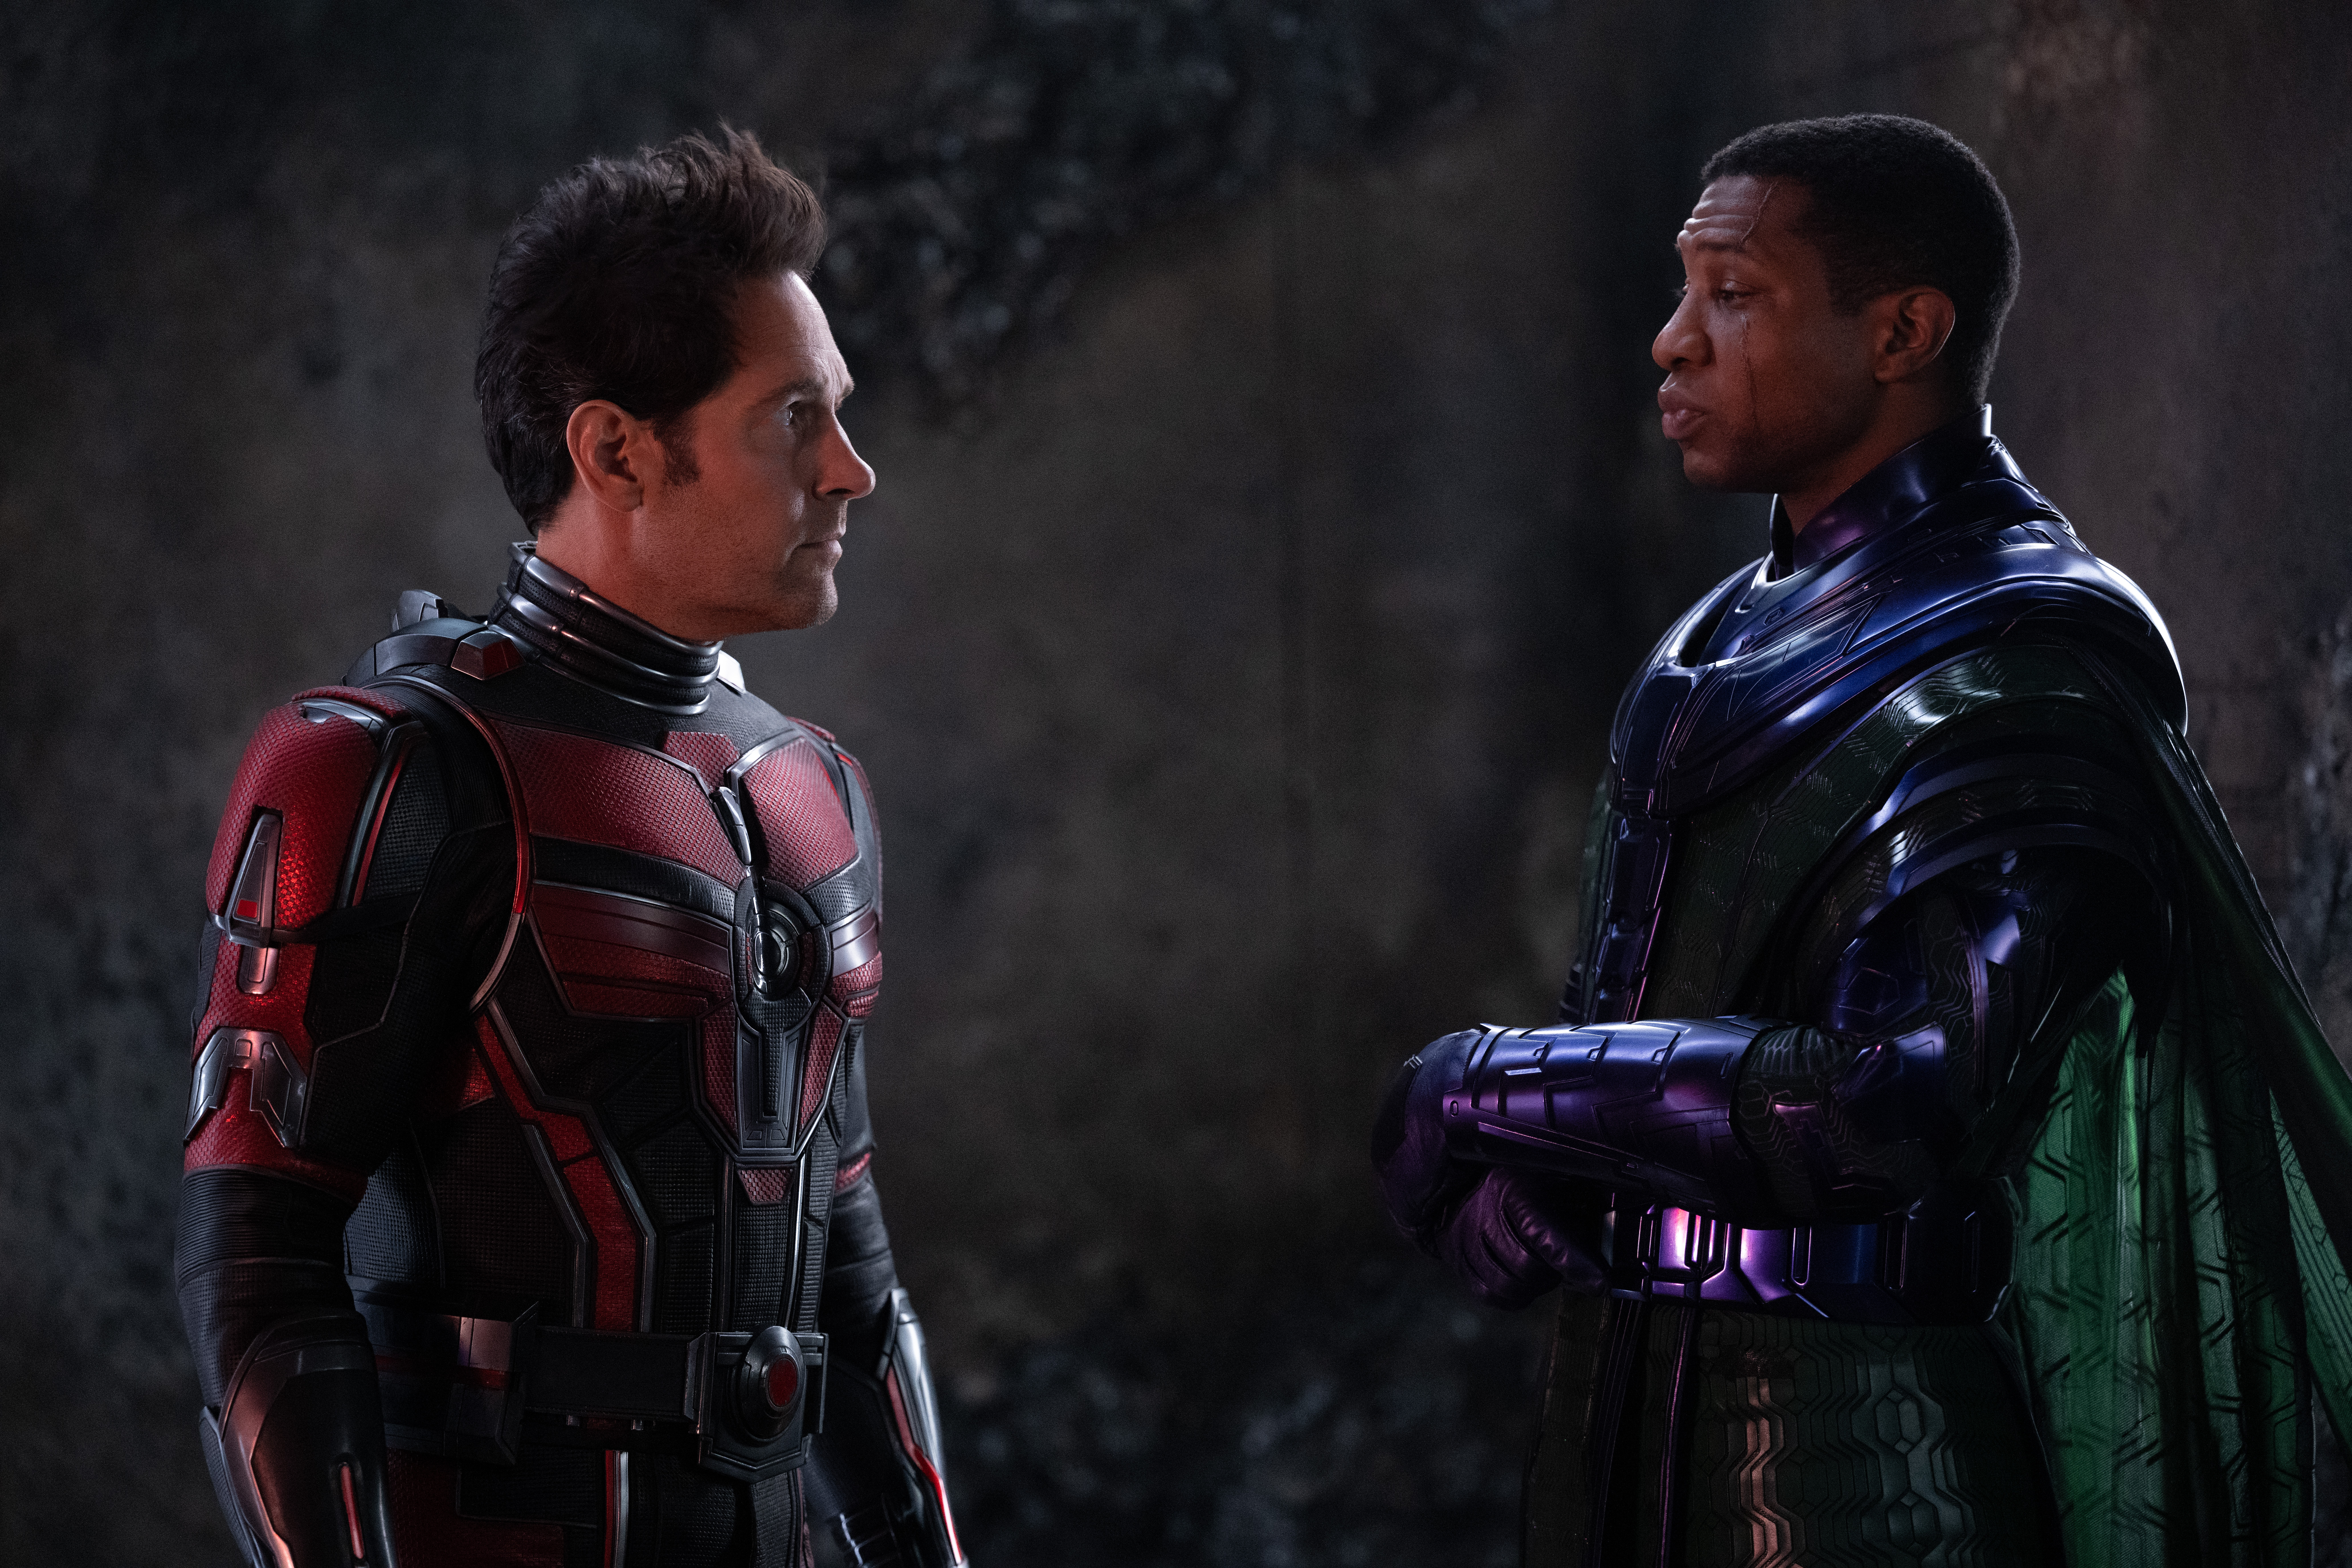 Paul Rudd as Scott Lang/Ant-Man and Jonathan Majors as Kang the Conqueror in Marvel Studios' ‘Ant-Man and The Wasp: Quantumania’. Photo by Jay Maidment. © 2022 MARVEL.